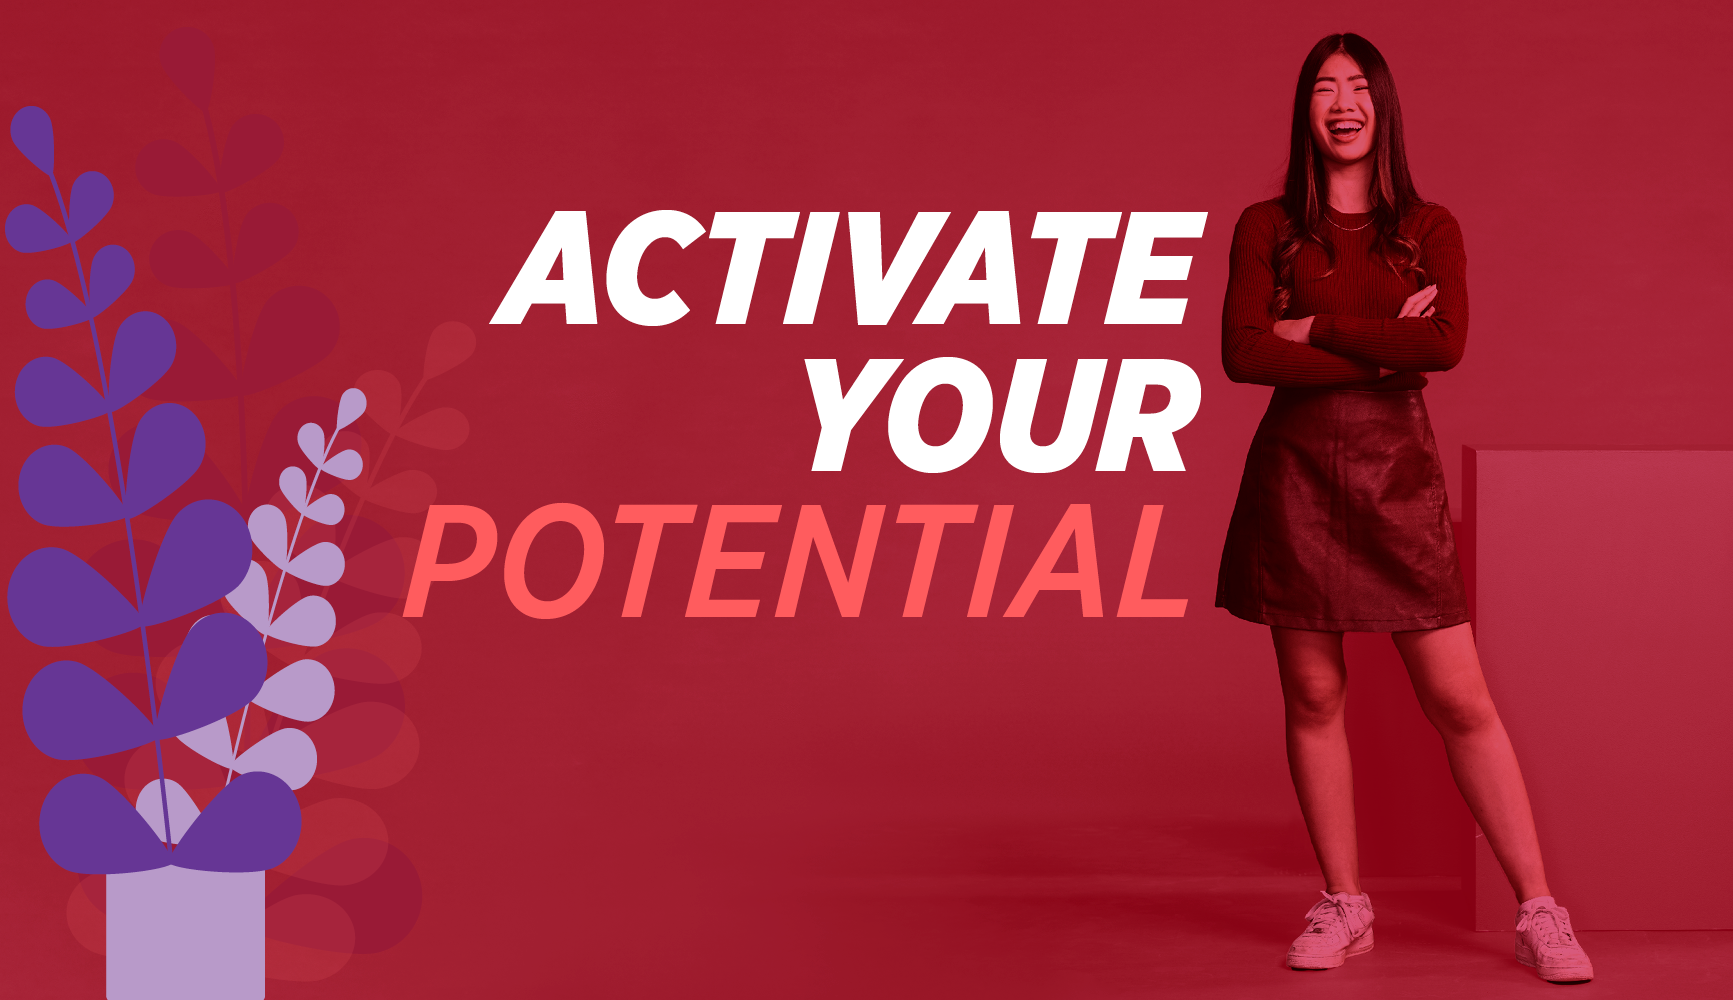 Activate your potential